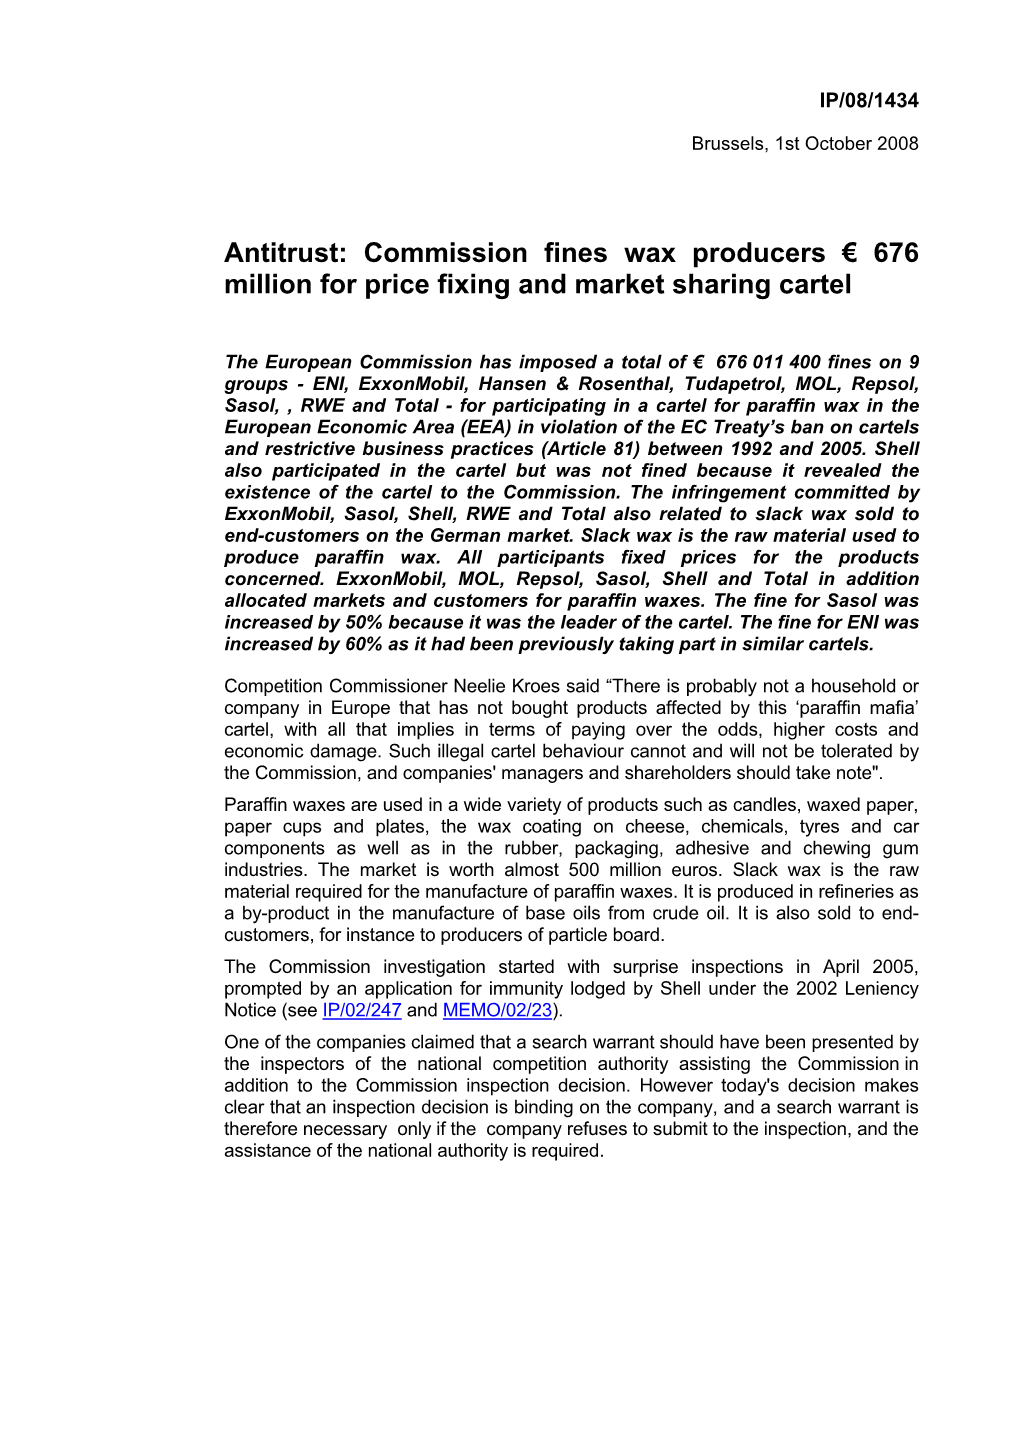 Antitrust: Commission Fines Wax Producers € 676 Million for Price Fixing and Market Sharing Cartel